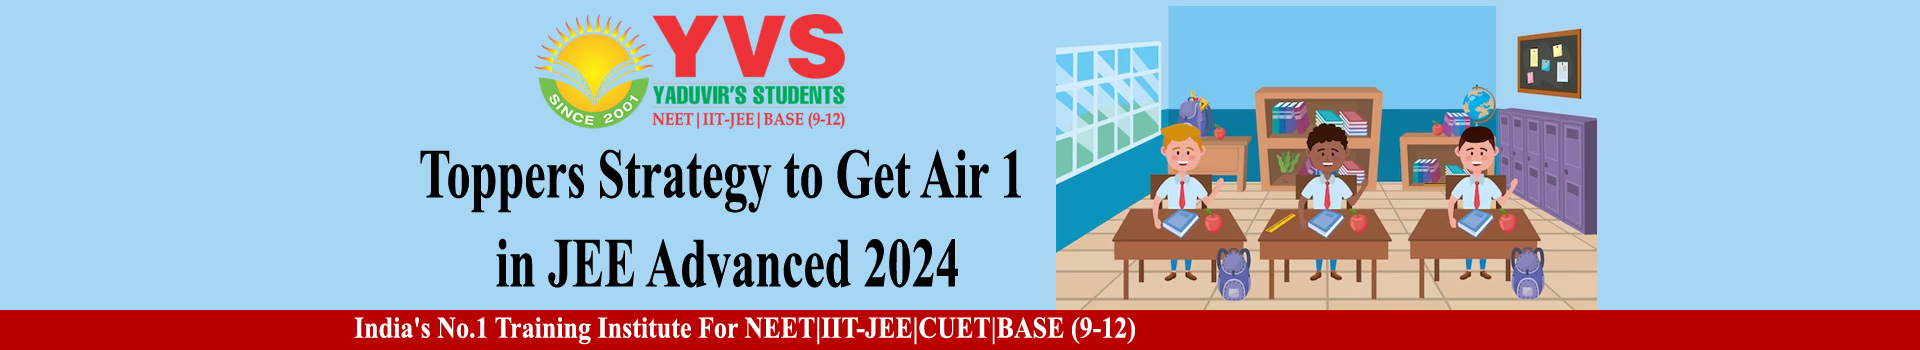 Toppers Strategy to Get Air 1 in JEE Advanced 2024